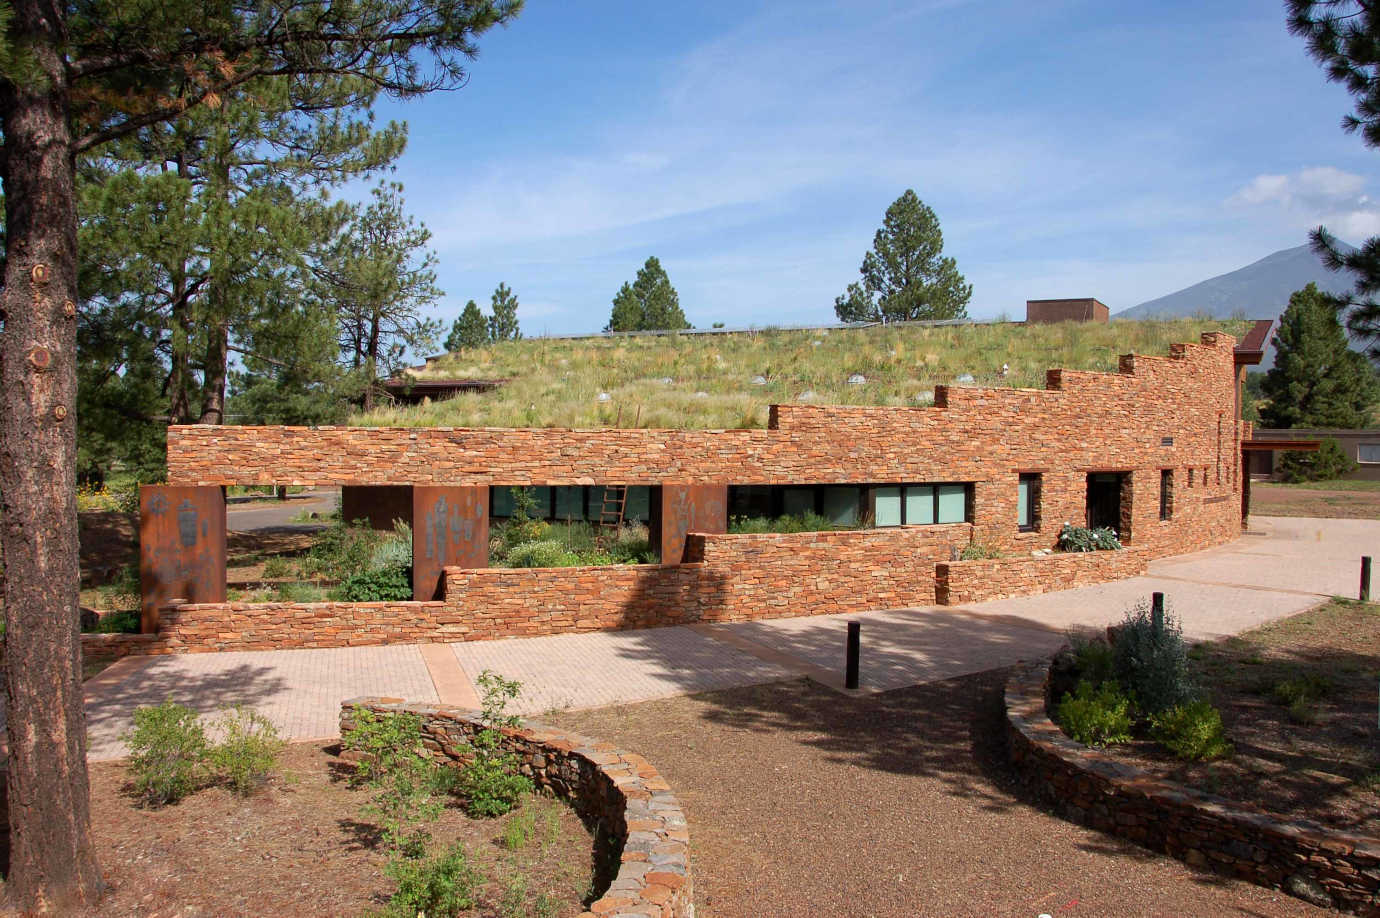 The Easton Collection Center is a LEED Platinum certified building that cares for tribal and cultural objects curated by the museum. Image courtesy of the Museum of Northern Arizona.